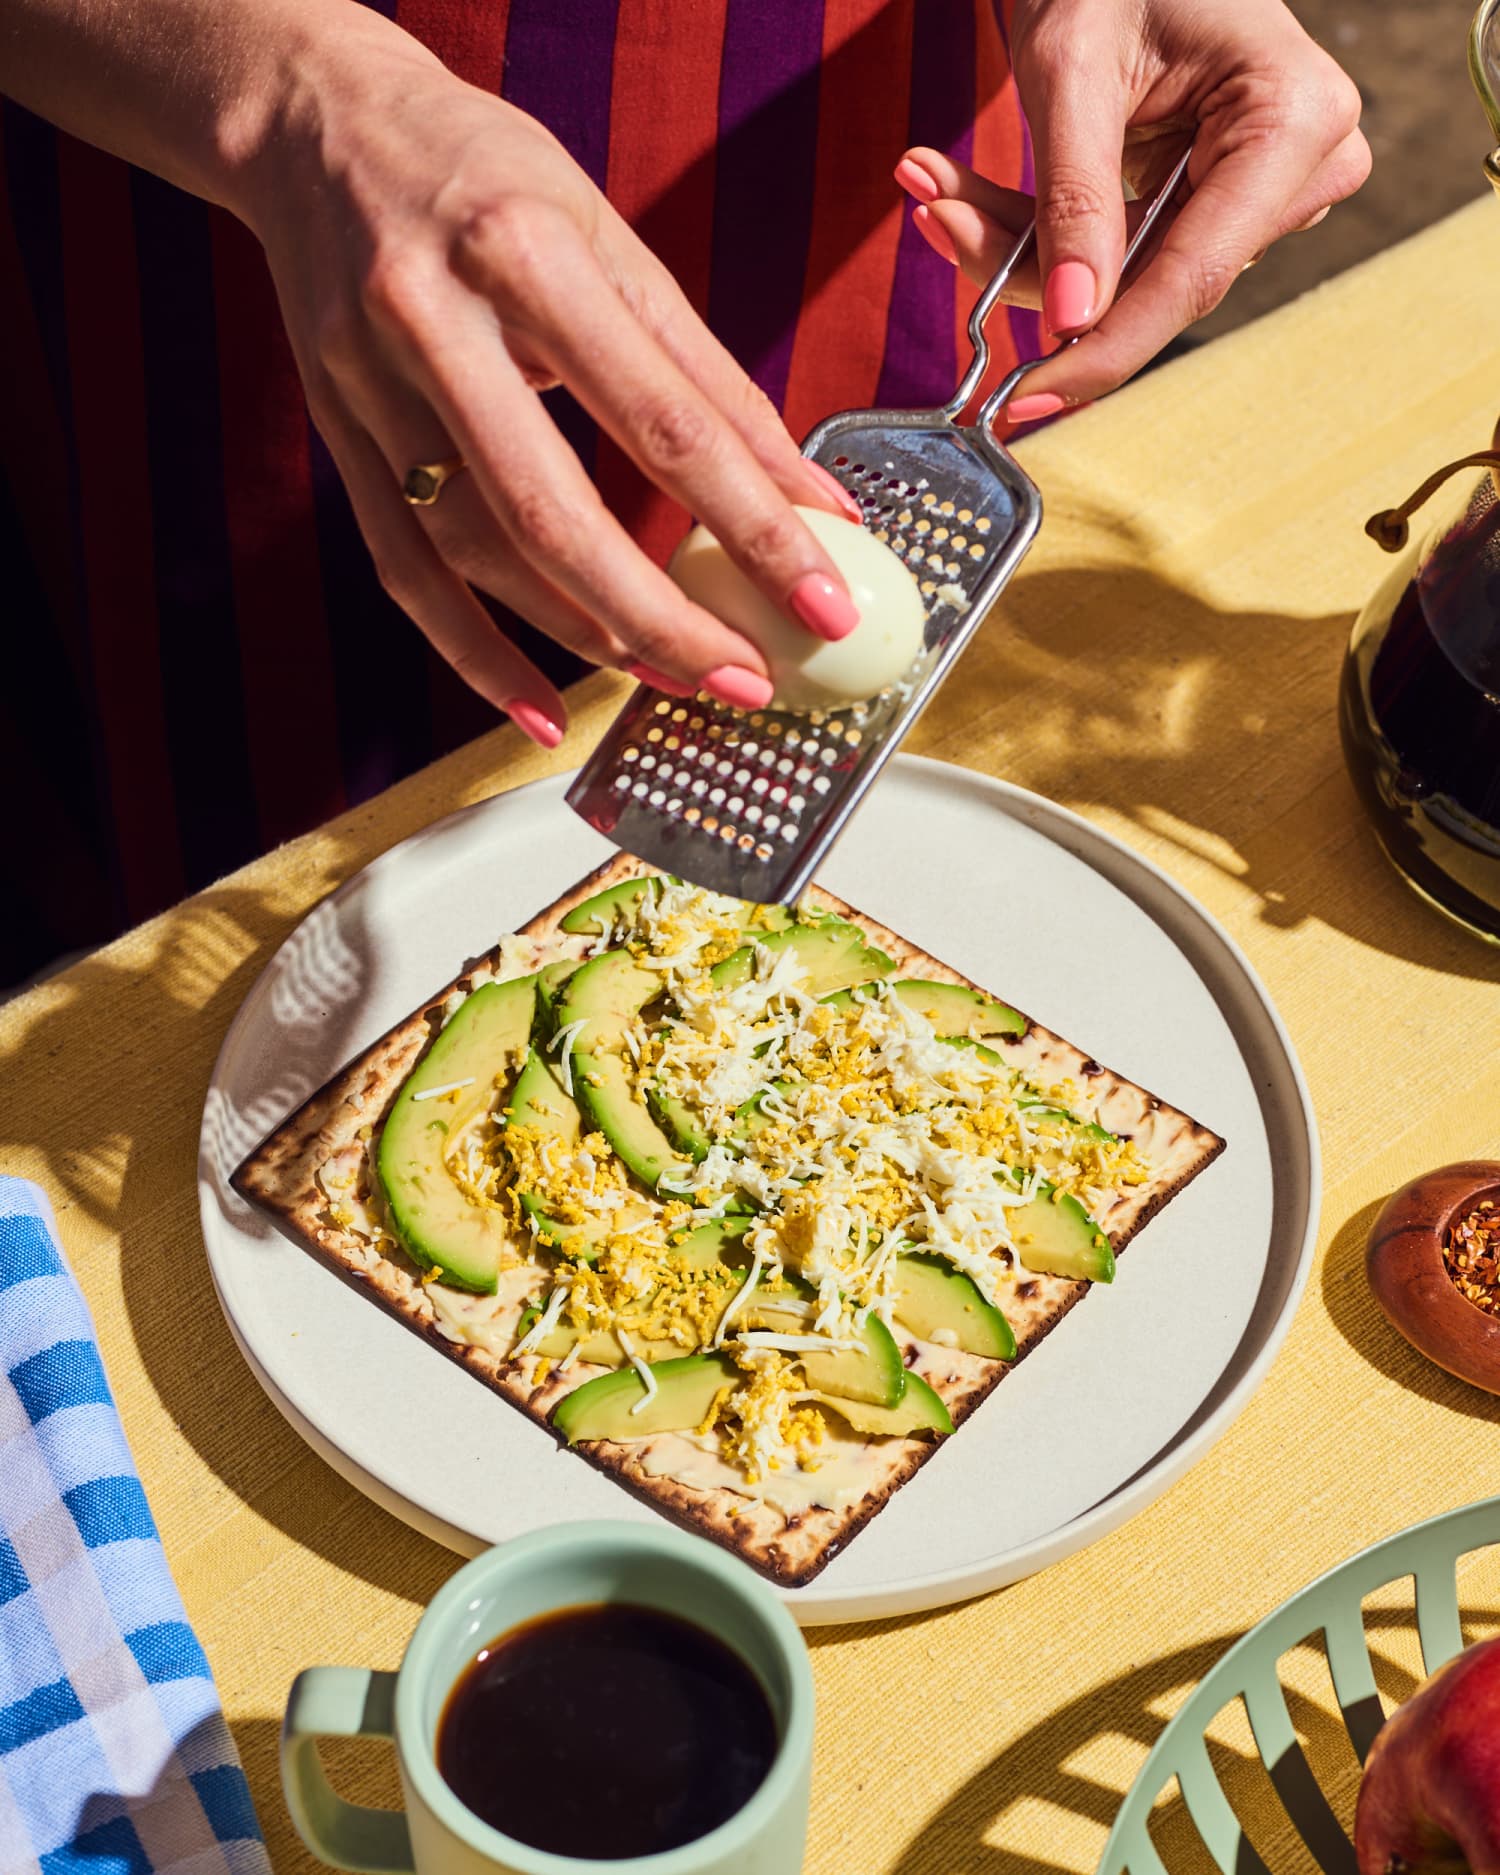 Make This TikTok-Famous Grated Egg Toast — But with Matzo